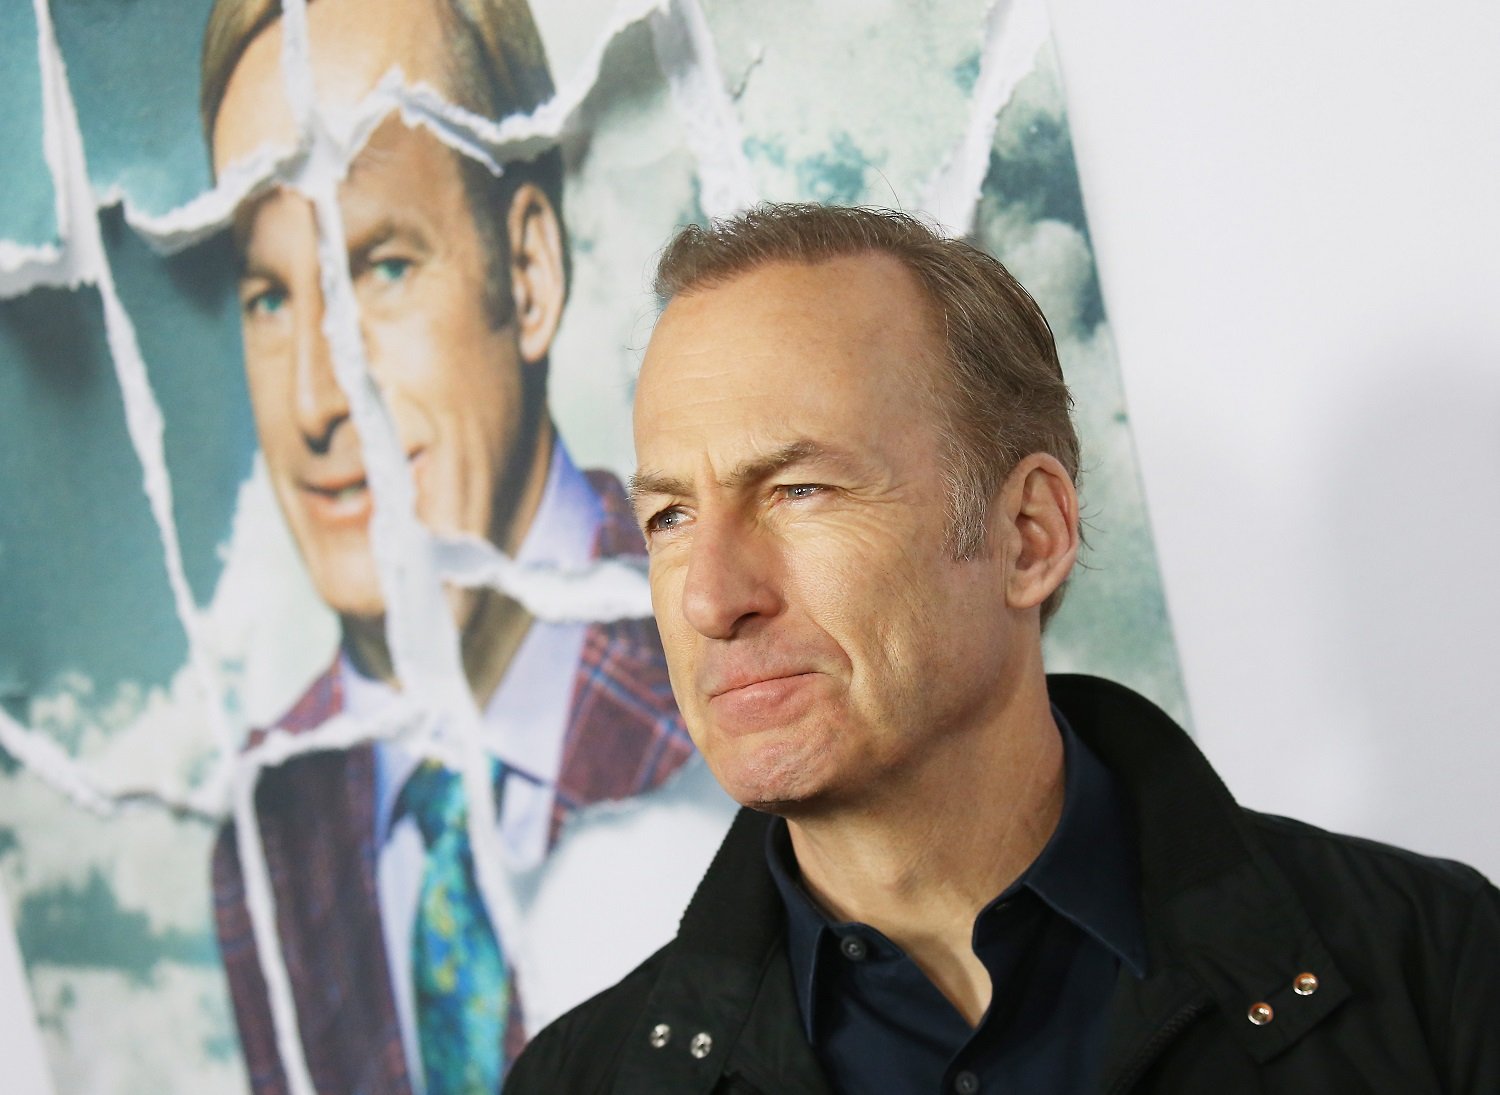 Bob Odenkirk previously wrote for SNL 